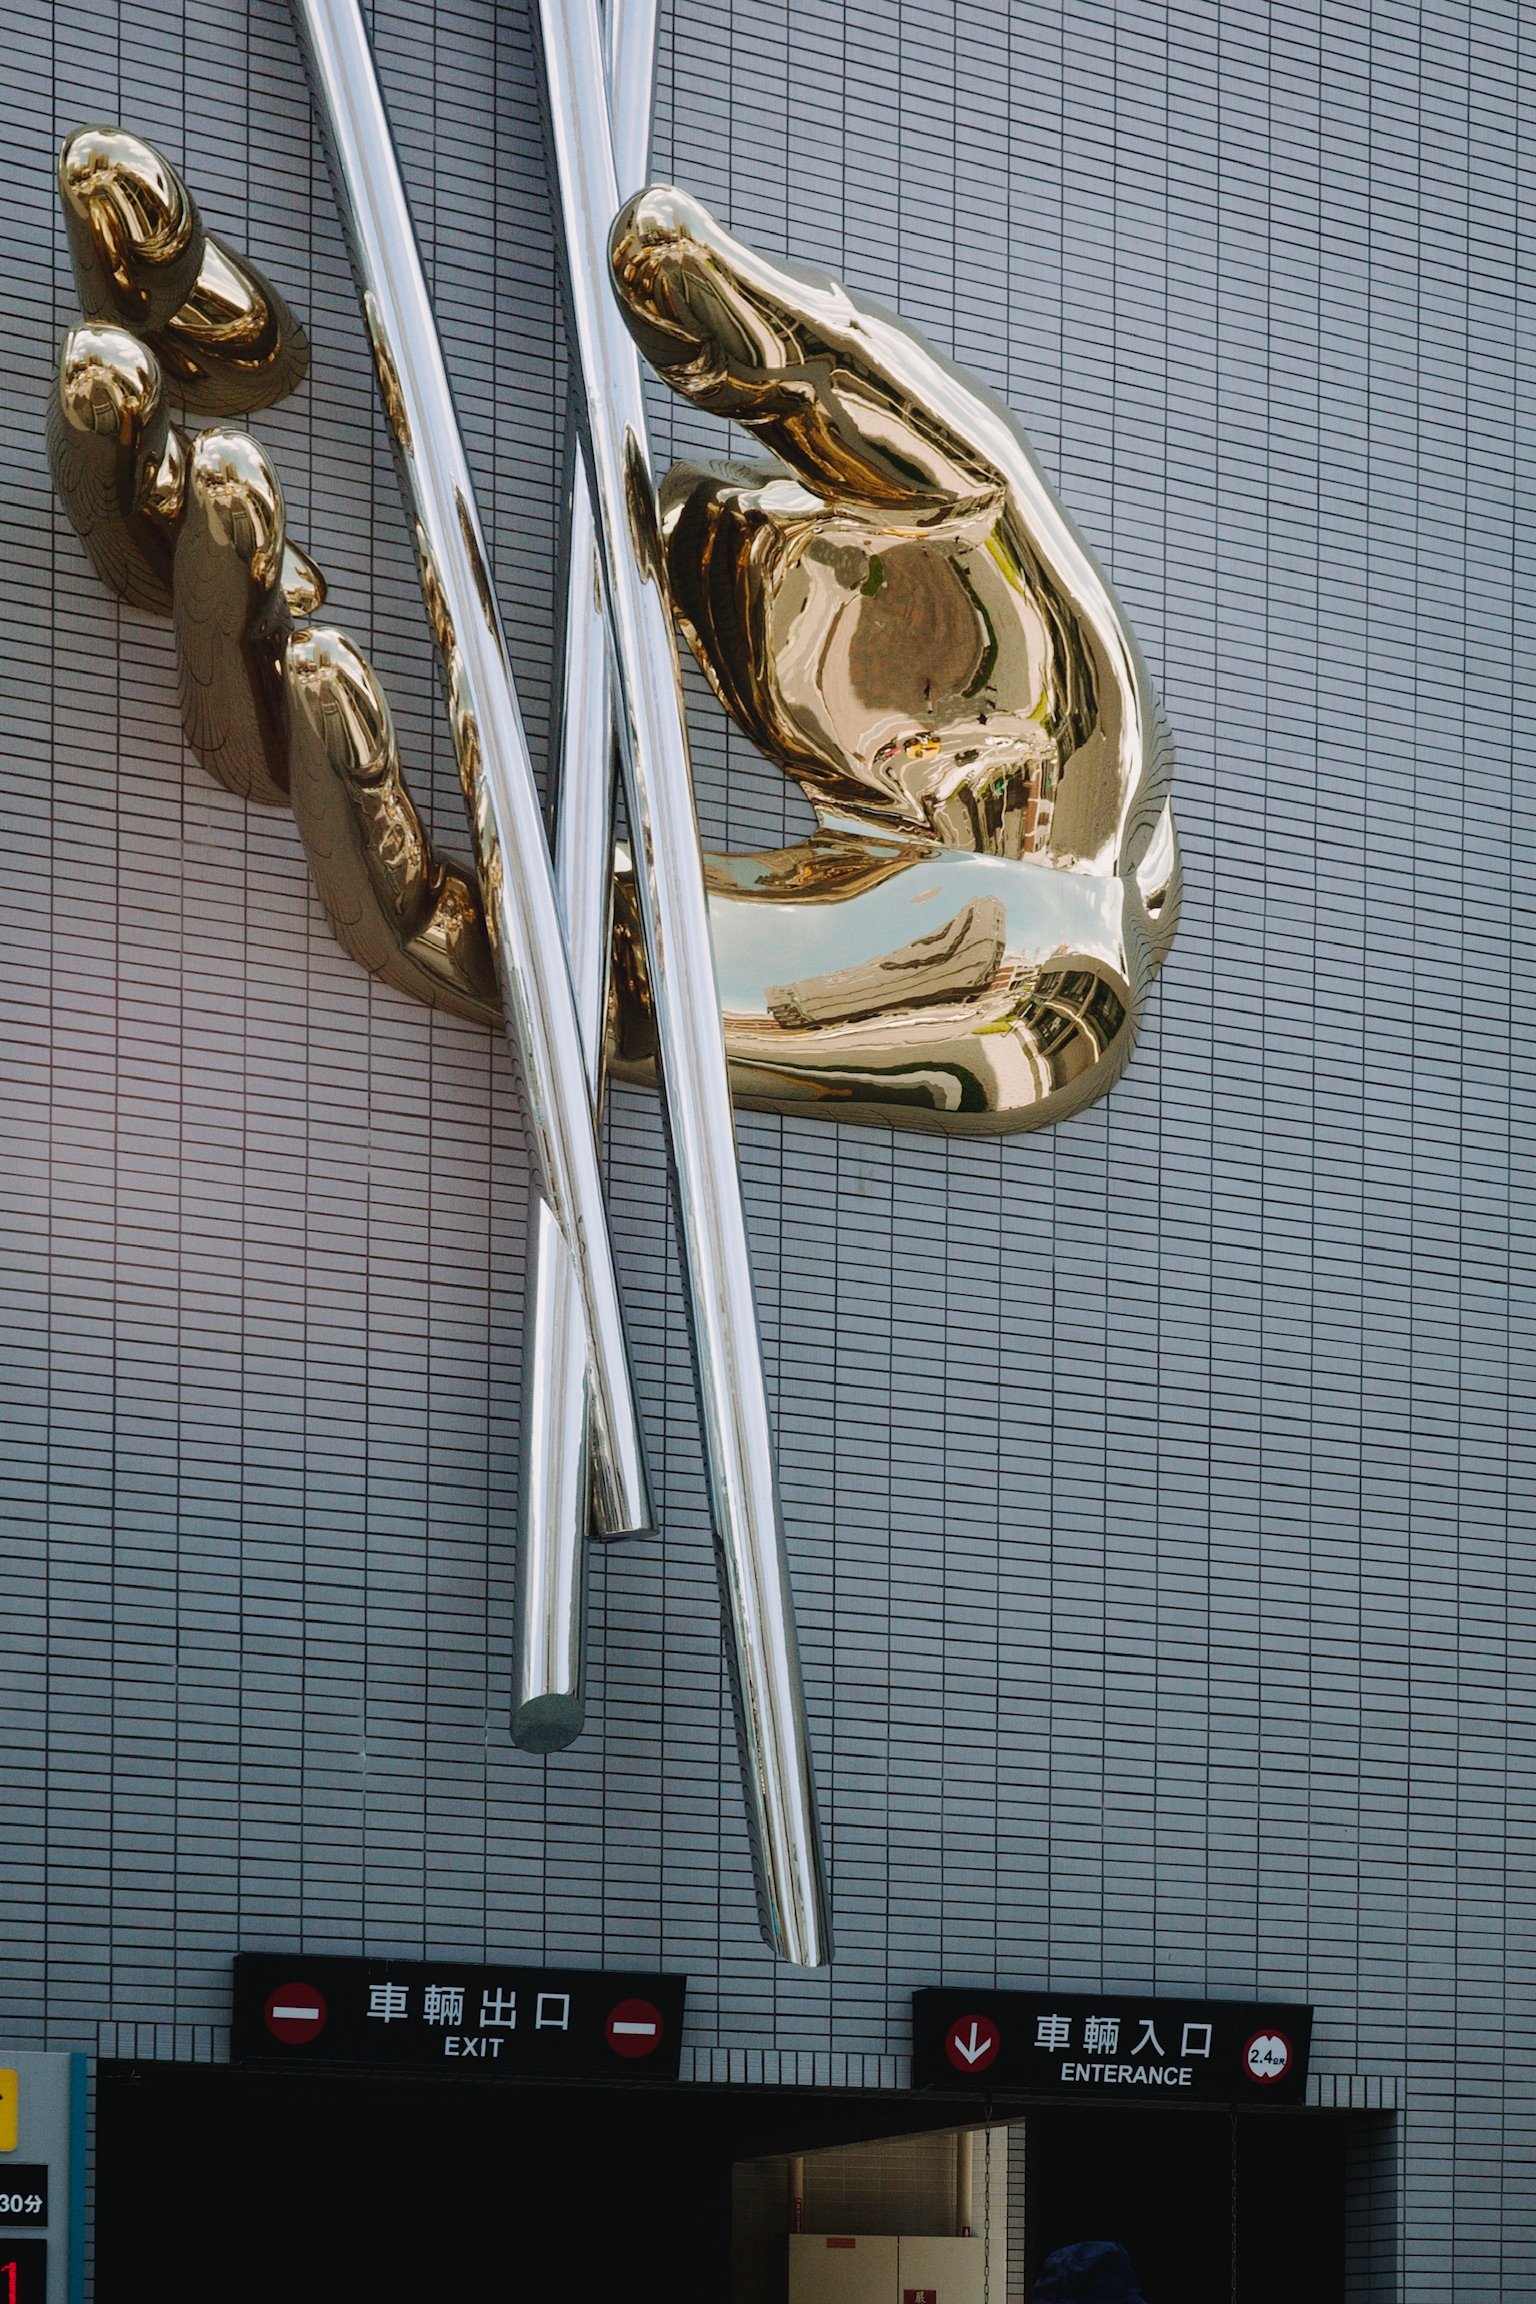 A sculpture, of giant golden hand holding what looks like aluminum rods or straws floating in space, on the side of a finely tiled building in white.